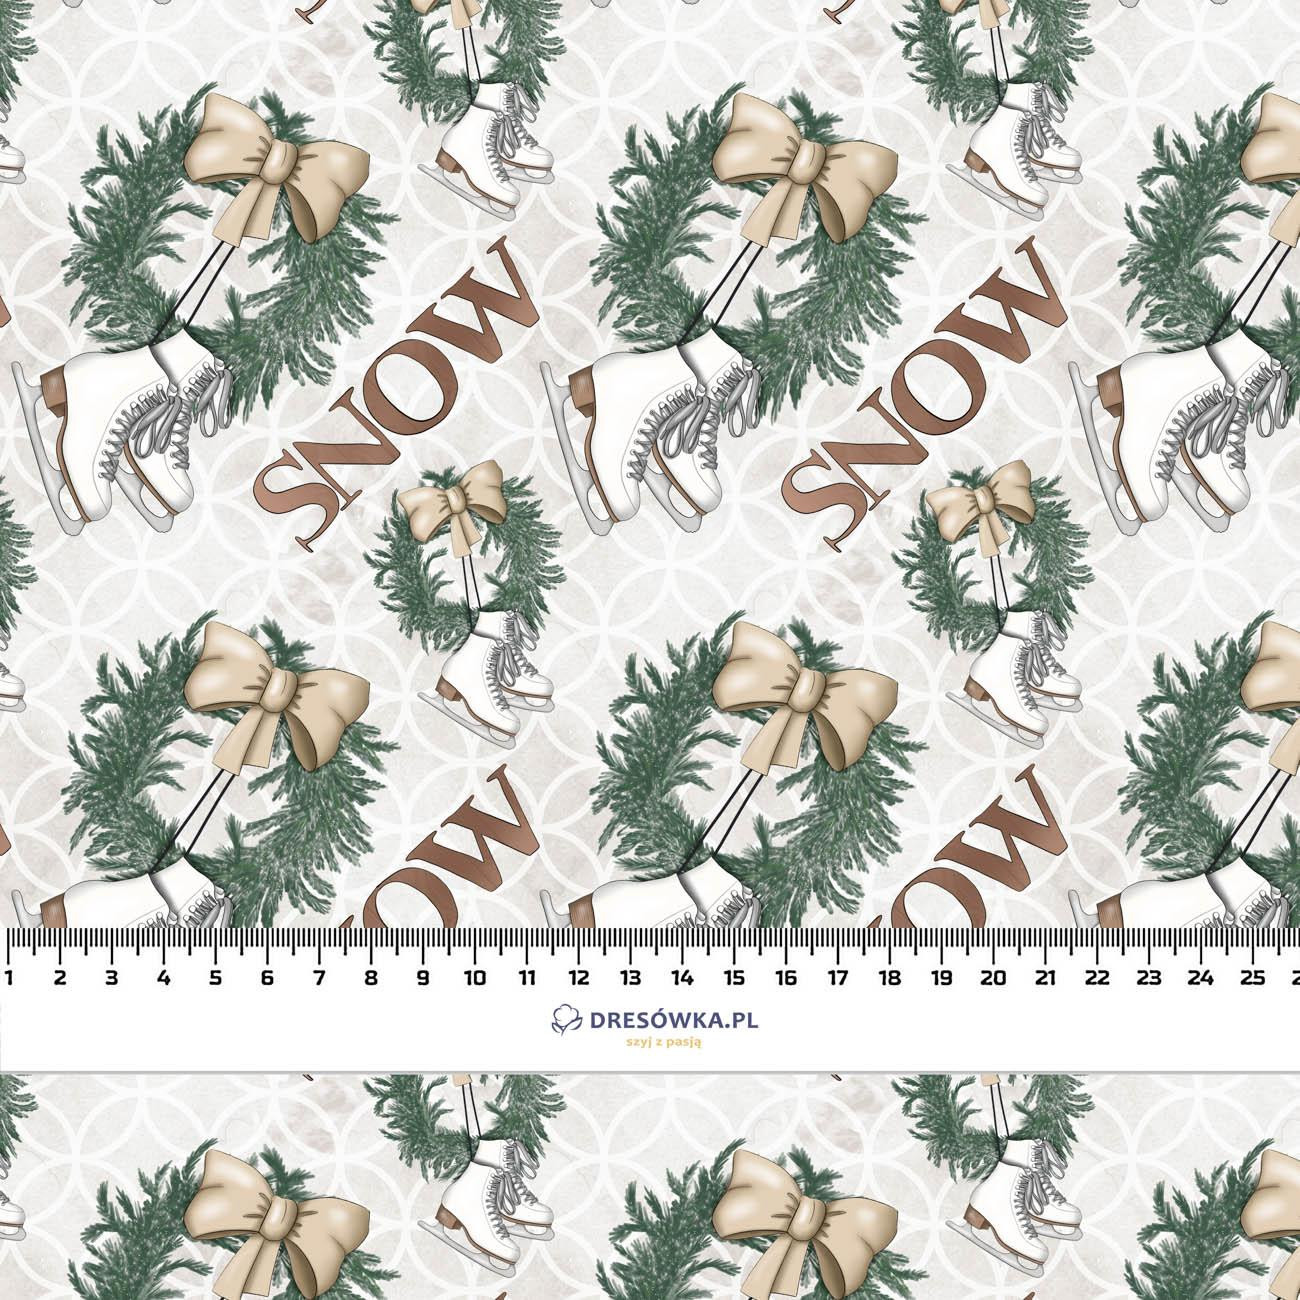 ICE SKATES / SNOW (WINTER IN THE CITY) - Cotton woven fabric